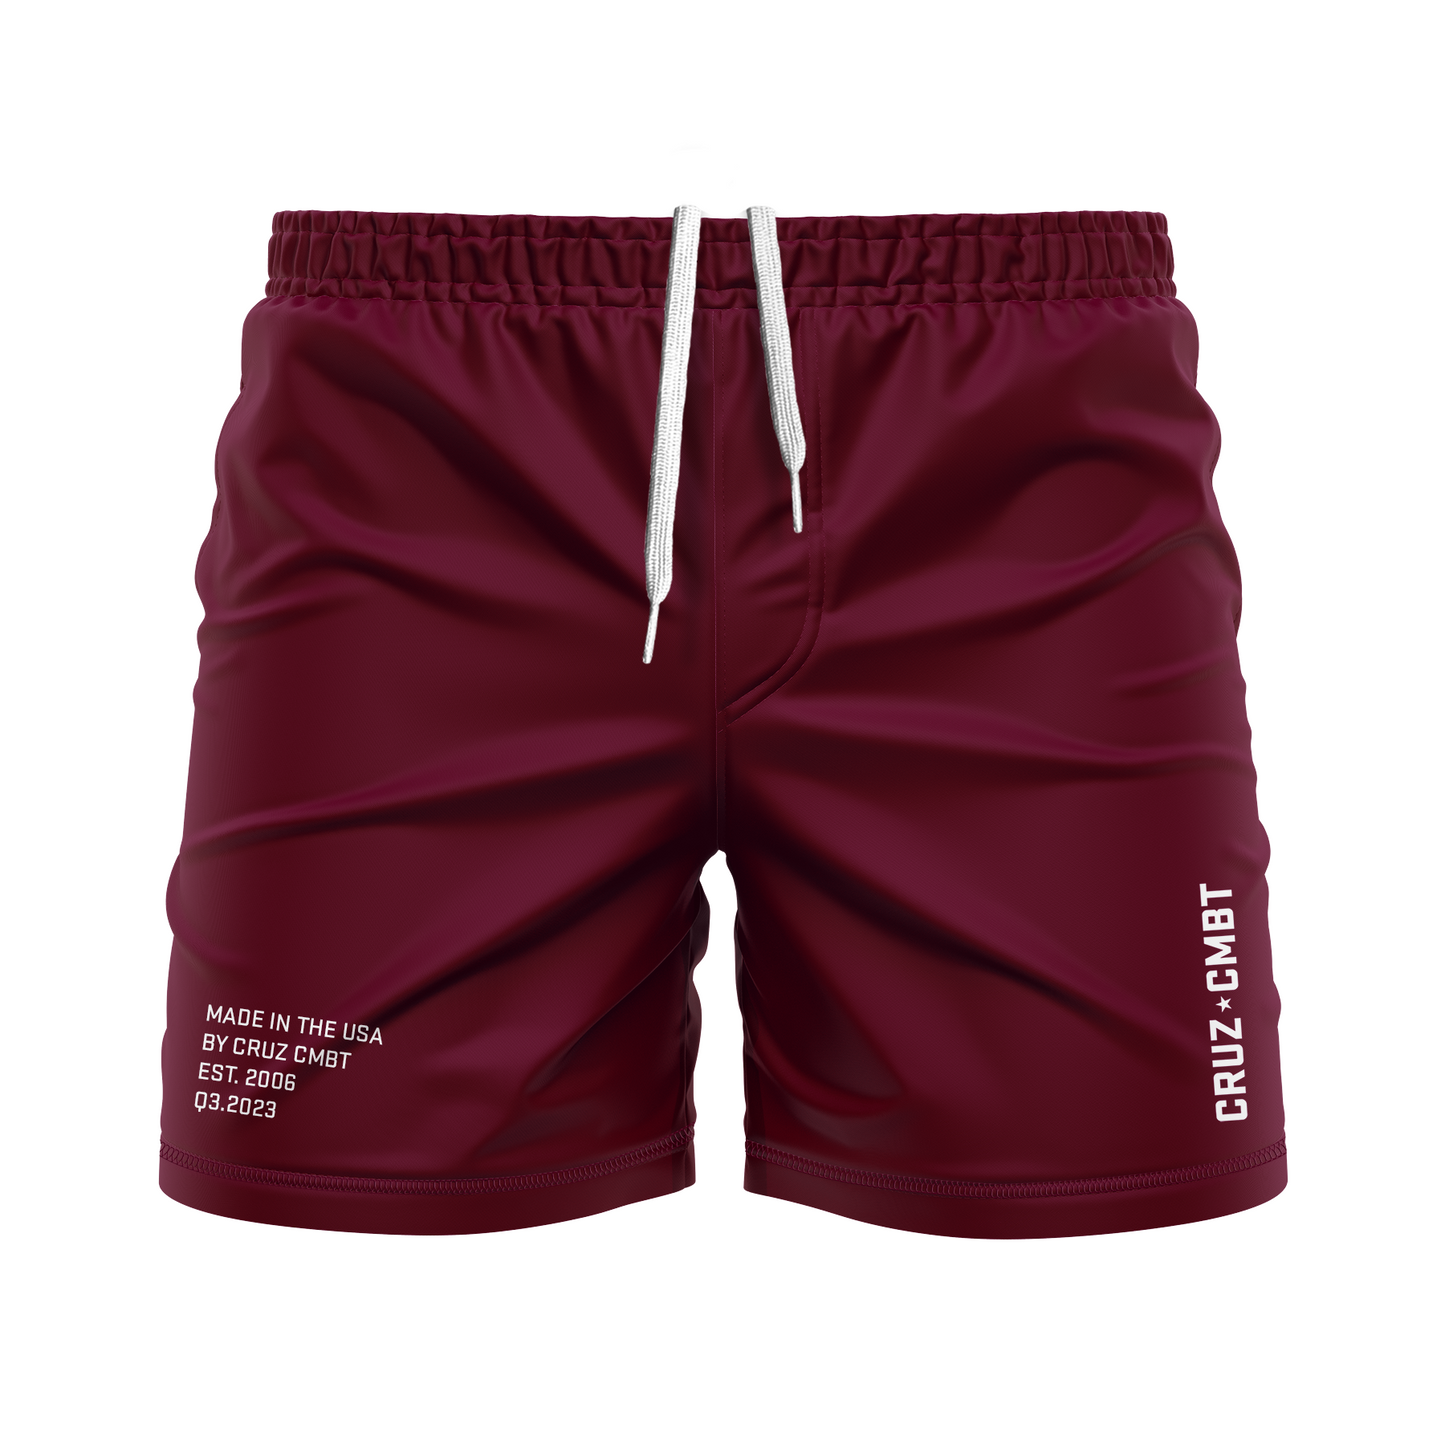 Base Collection men's FC shorts, maroon